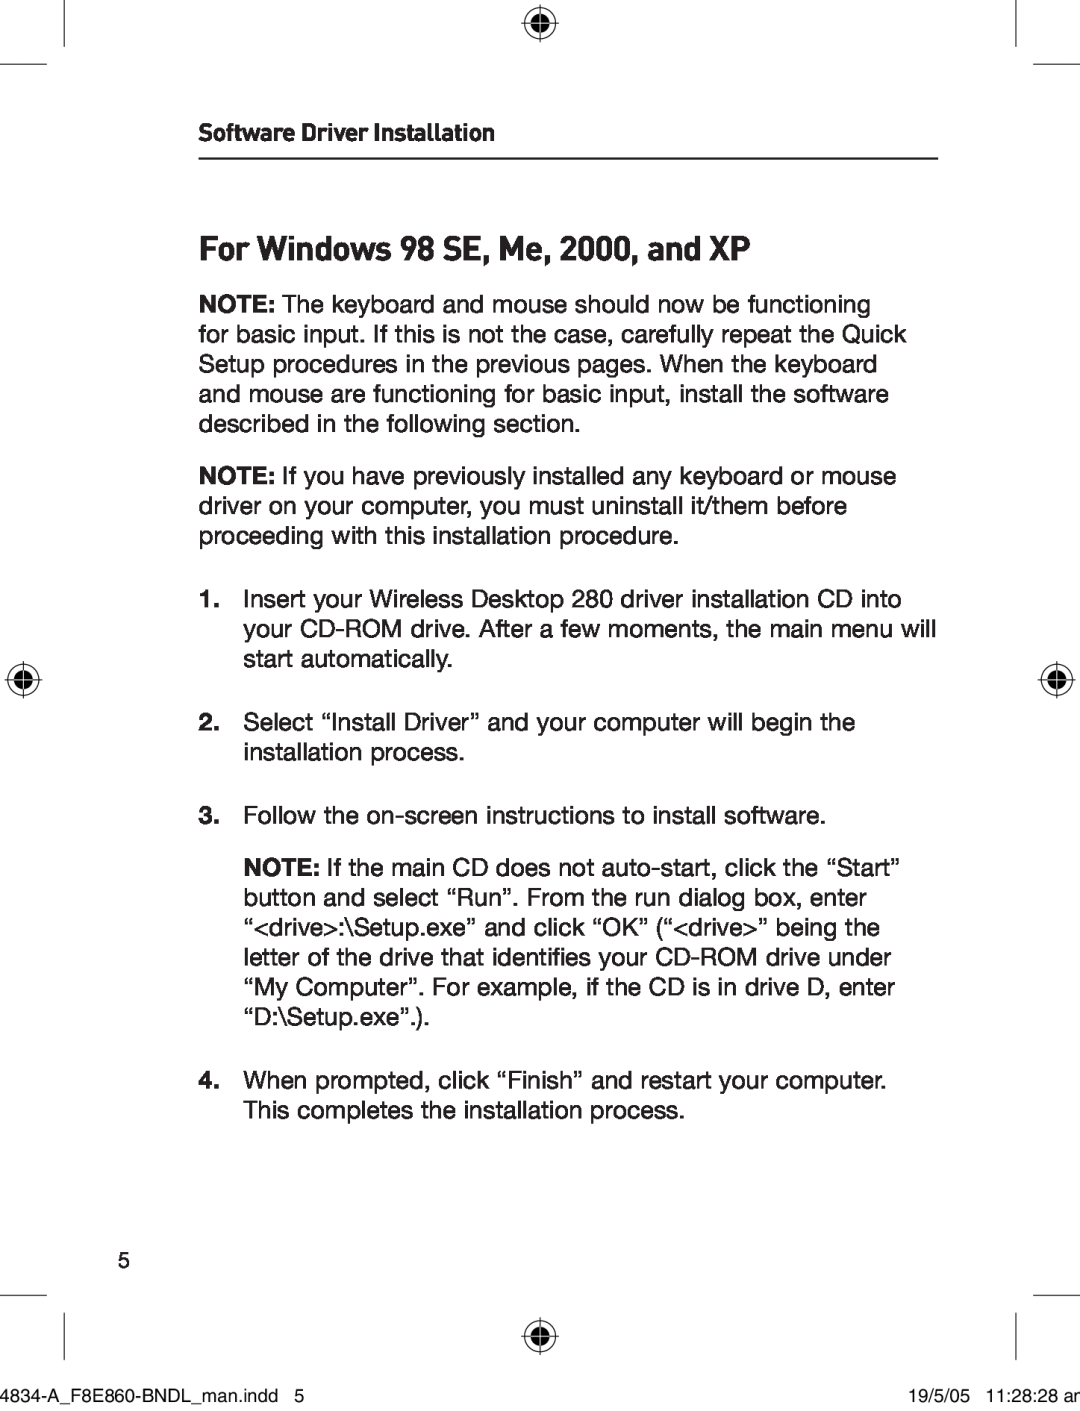 Belkin 280 manual For Windows 98 SE, Me, 2000, and XP, Software Driver Installation 